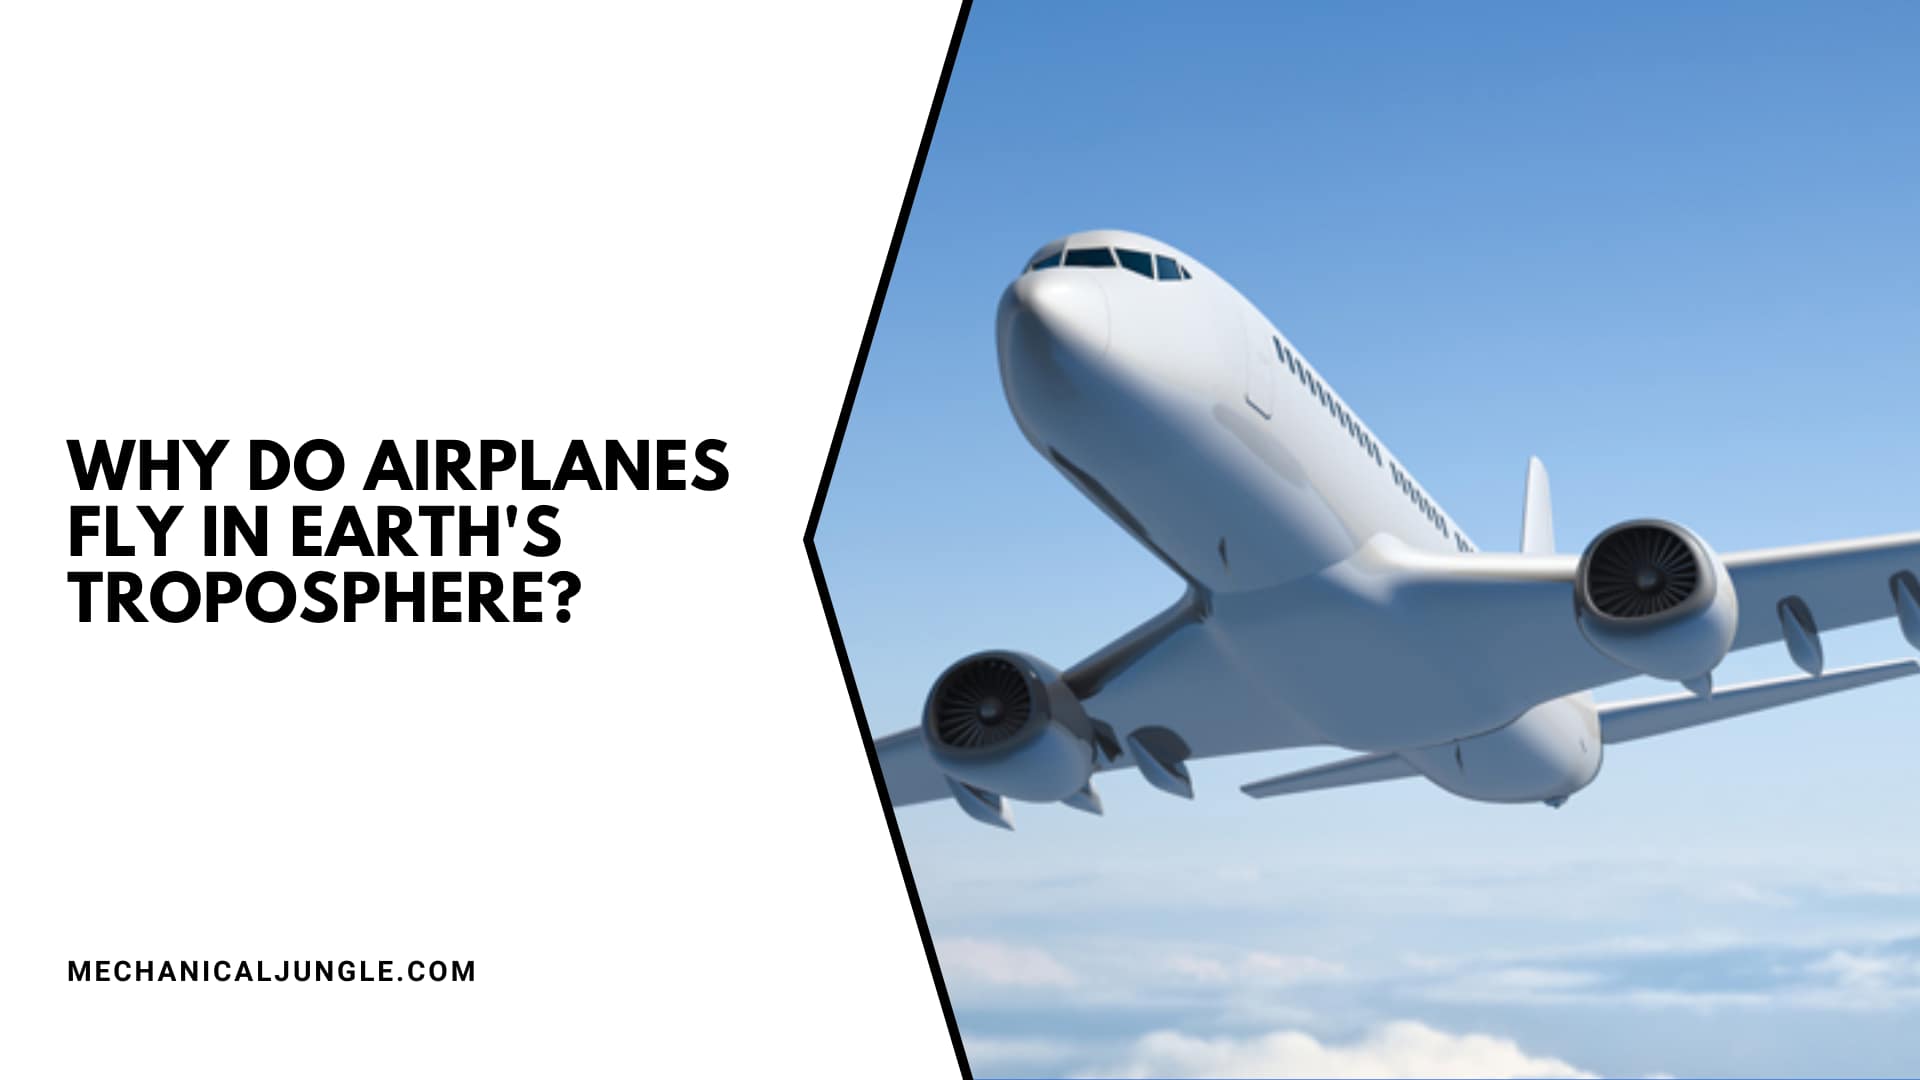 Why Do Airplanes Fly in Earth's Troposphere?